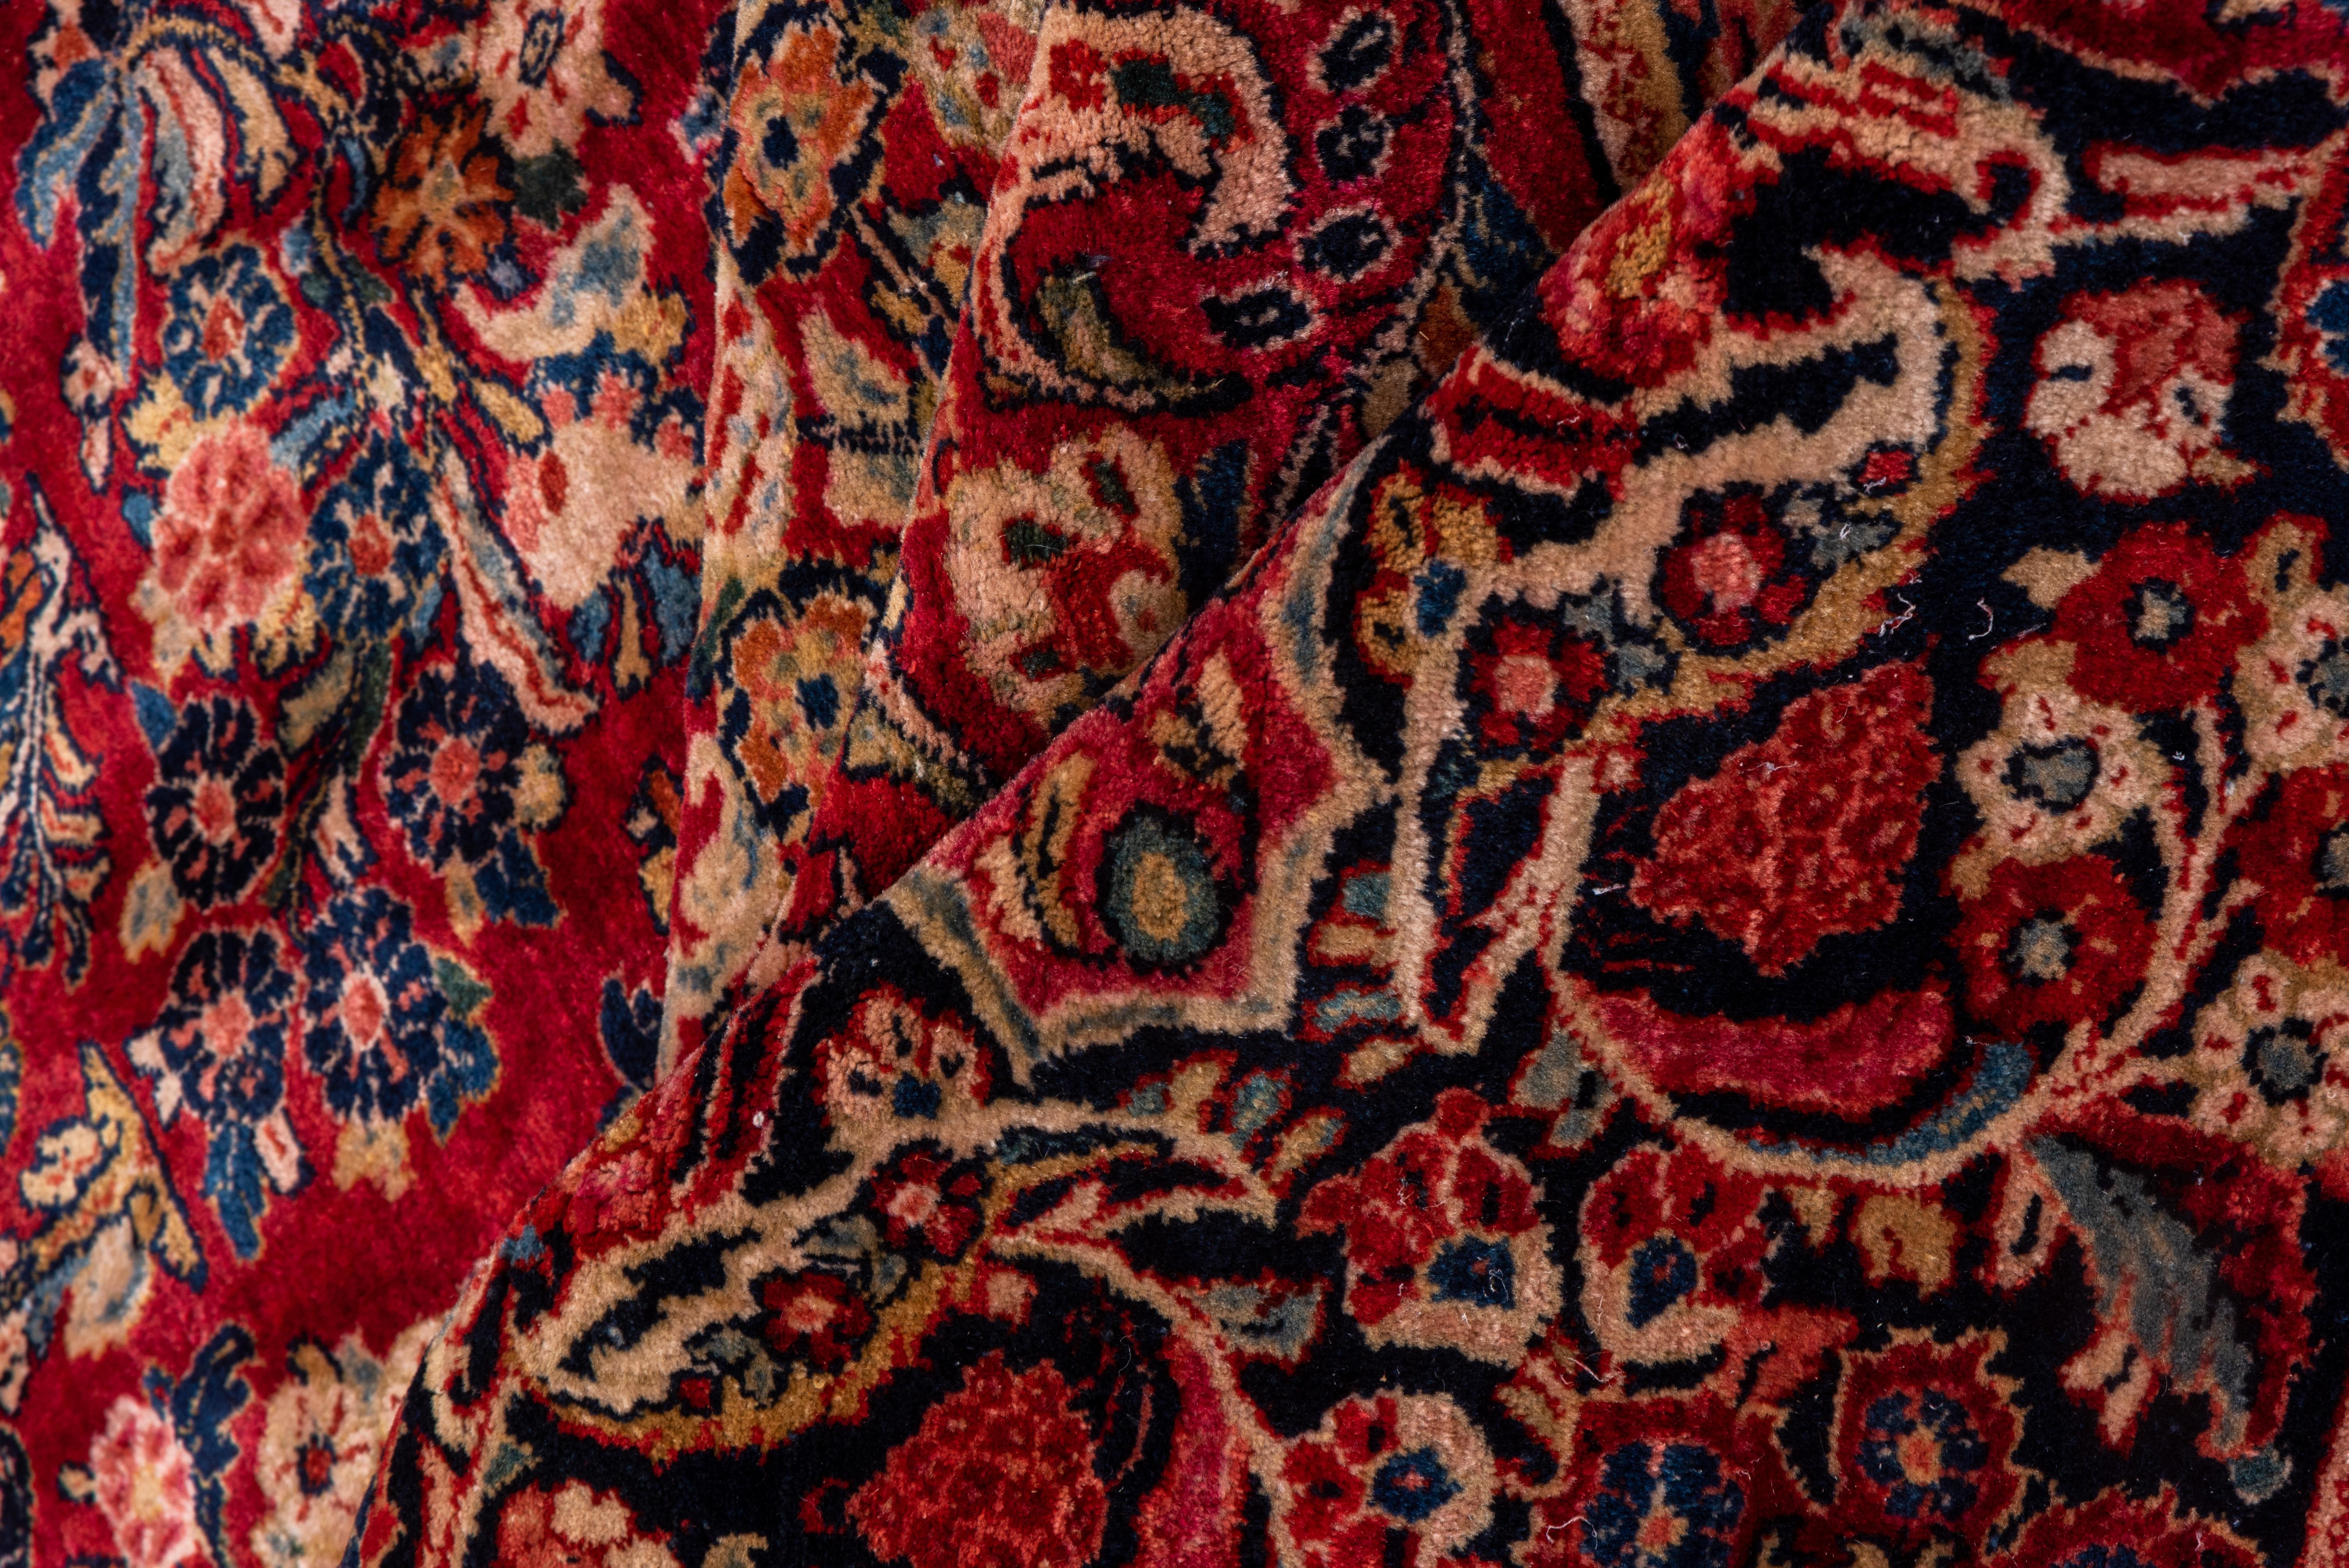 Detached floral sprays swim busily on the red ground, carefully skirting the small central motif. This is a classic 